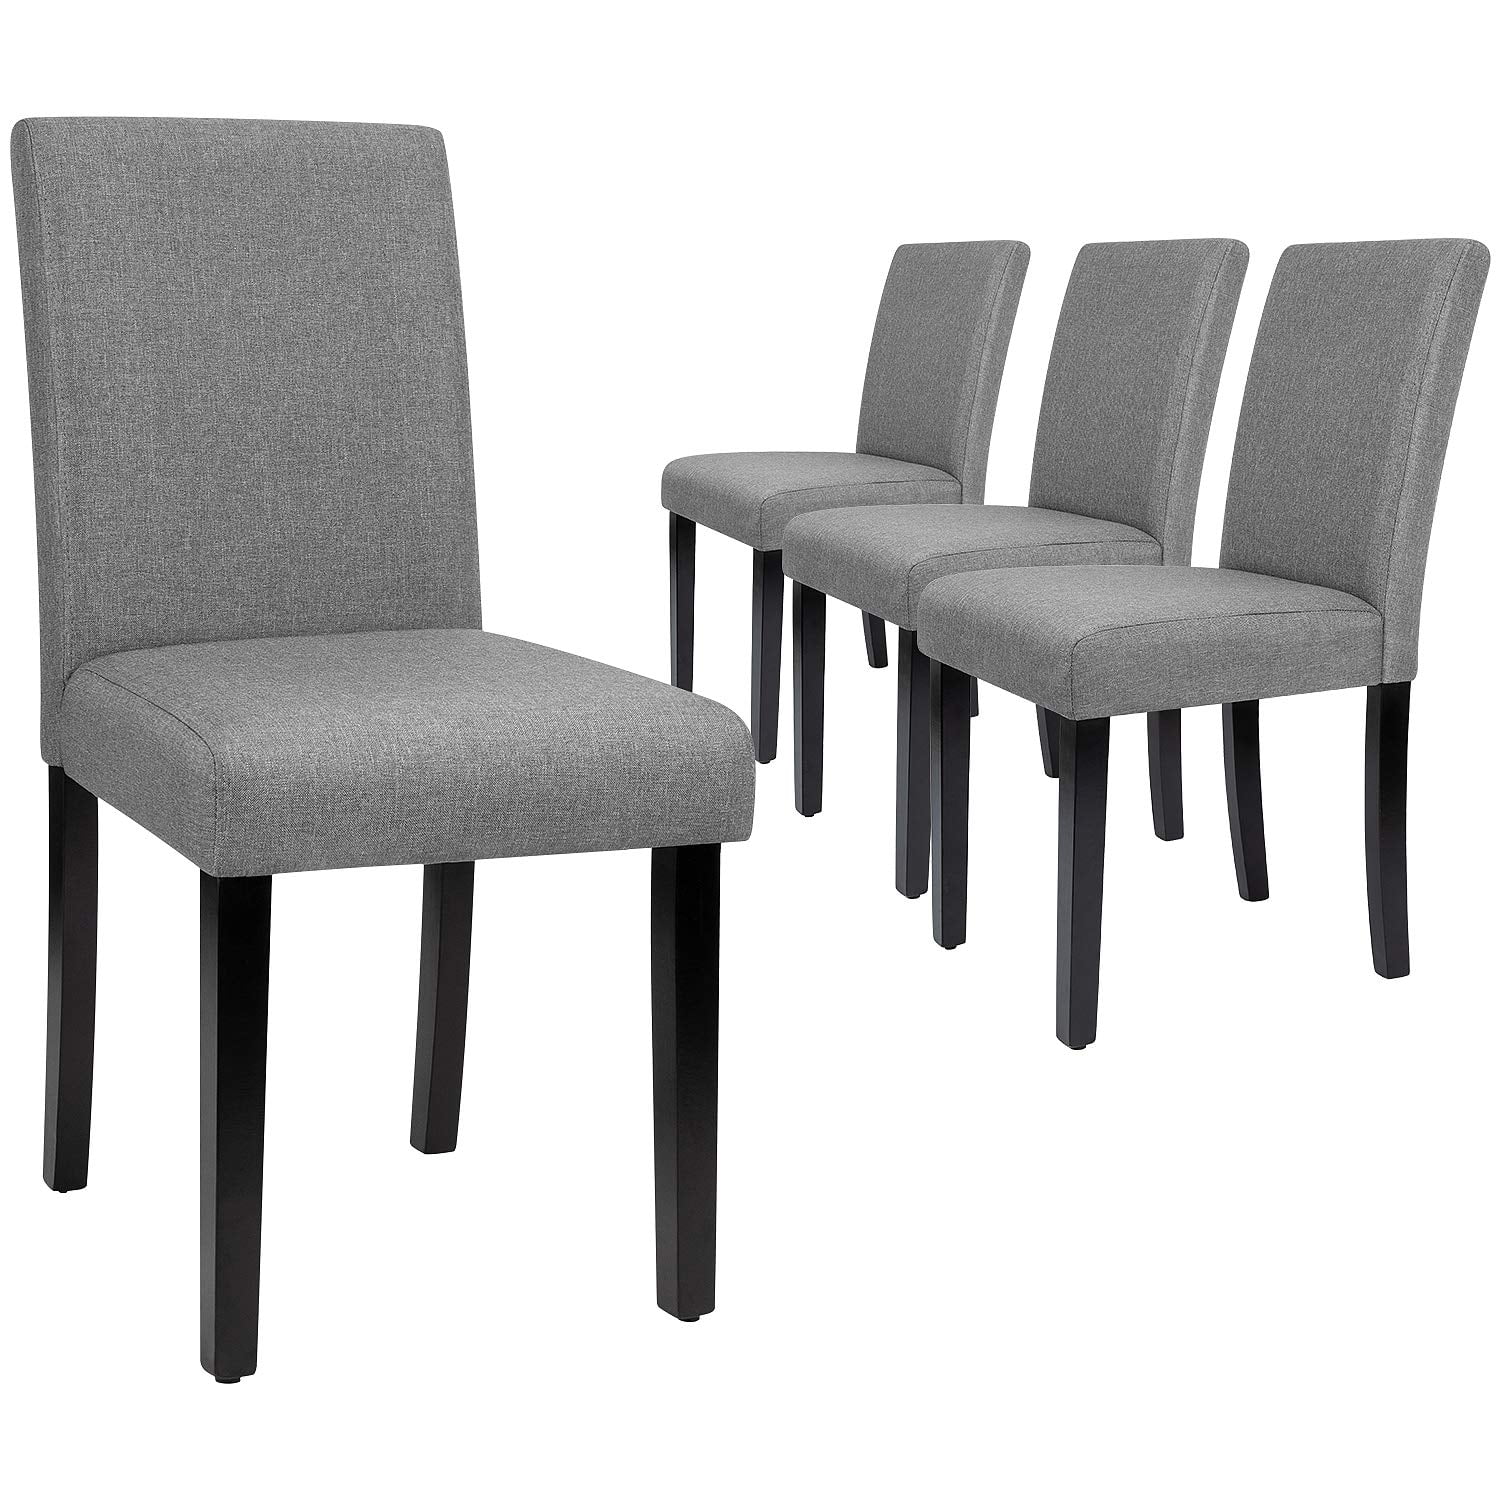 Walnew Set Of 4 Modern Upholstered, Grey Upholstered Dining Chairs With Arms